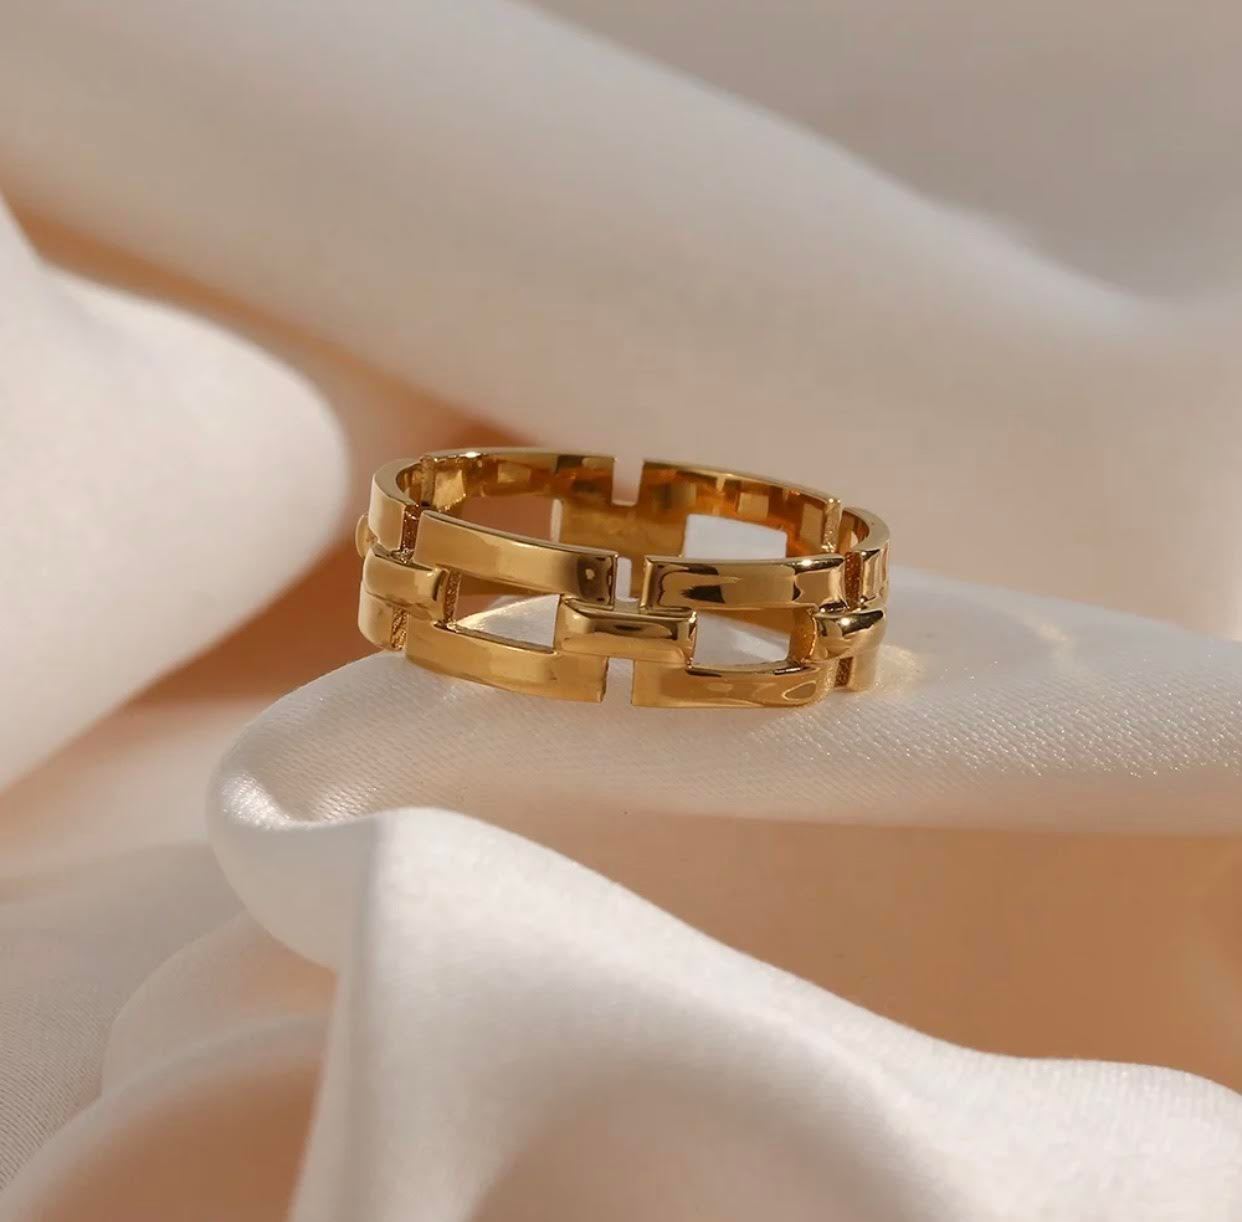 H bone ring 14k gold stacking rings from 1 oak jewelry